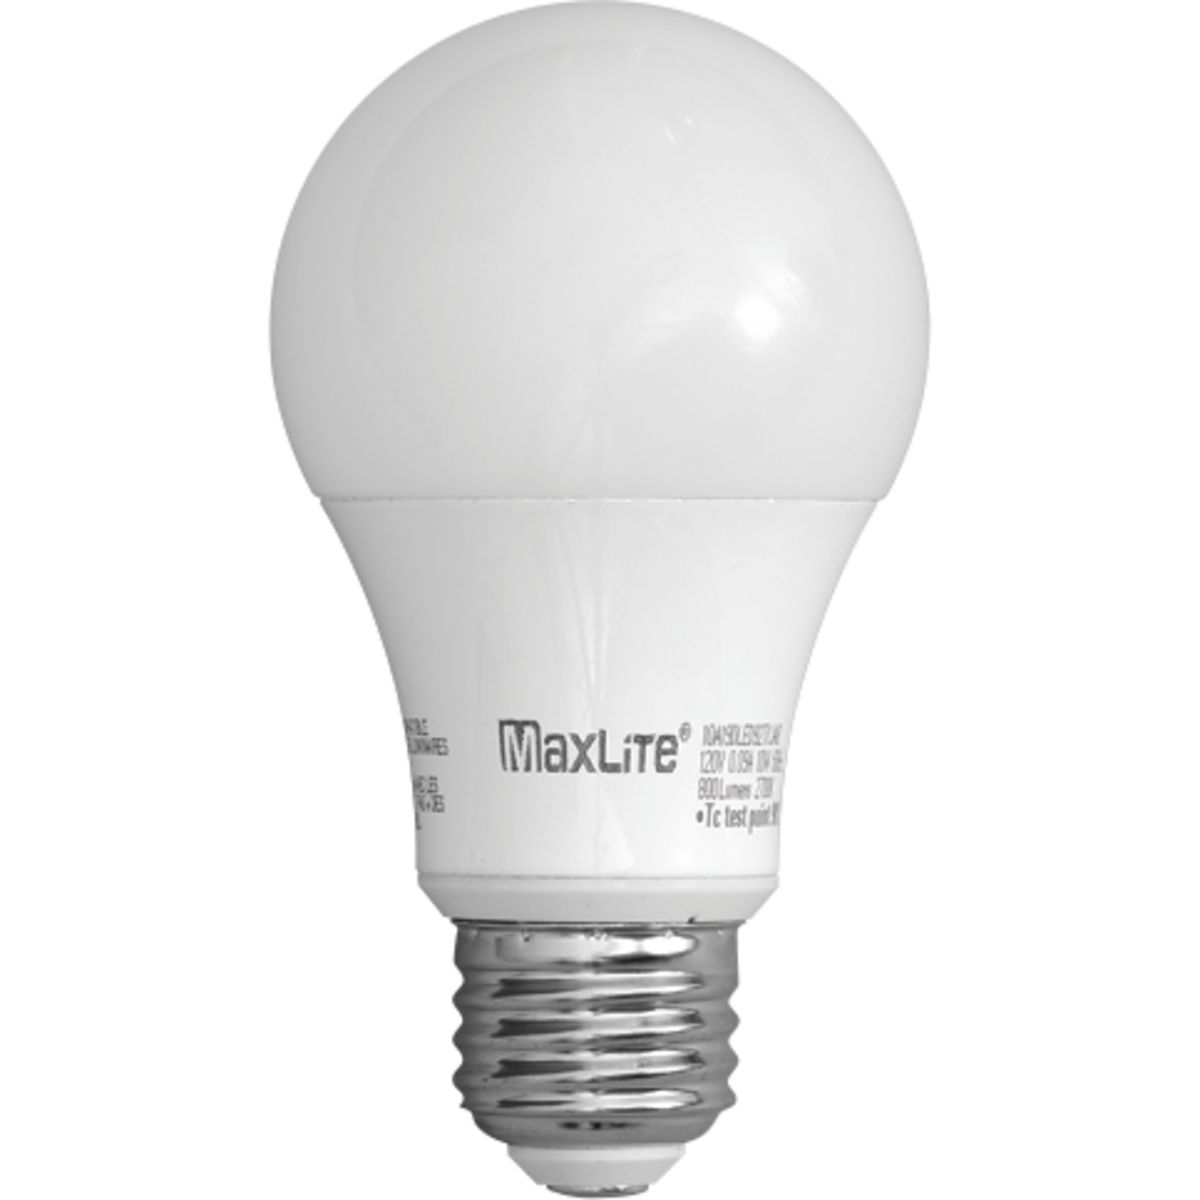 Maxlite 10W JA8 LED Lamp with an E26 base. Designed to meet Title 24 code for the State of California, this light bulb has a soft white appearnce equivalent to that of a 60W incandscent bulb, while consuming nearly 83 percent less energy. The bulb is Energy Star rated, enclosed rated, and dimmable.